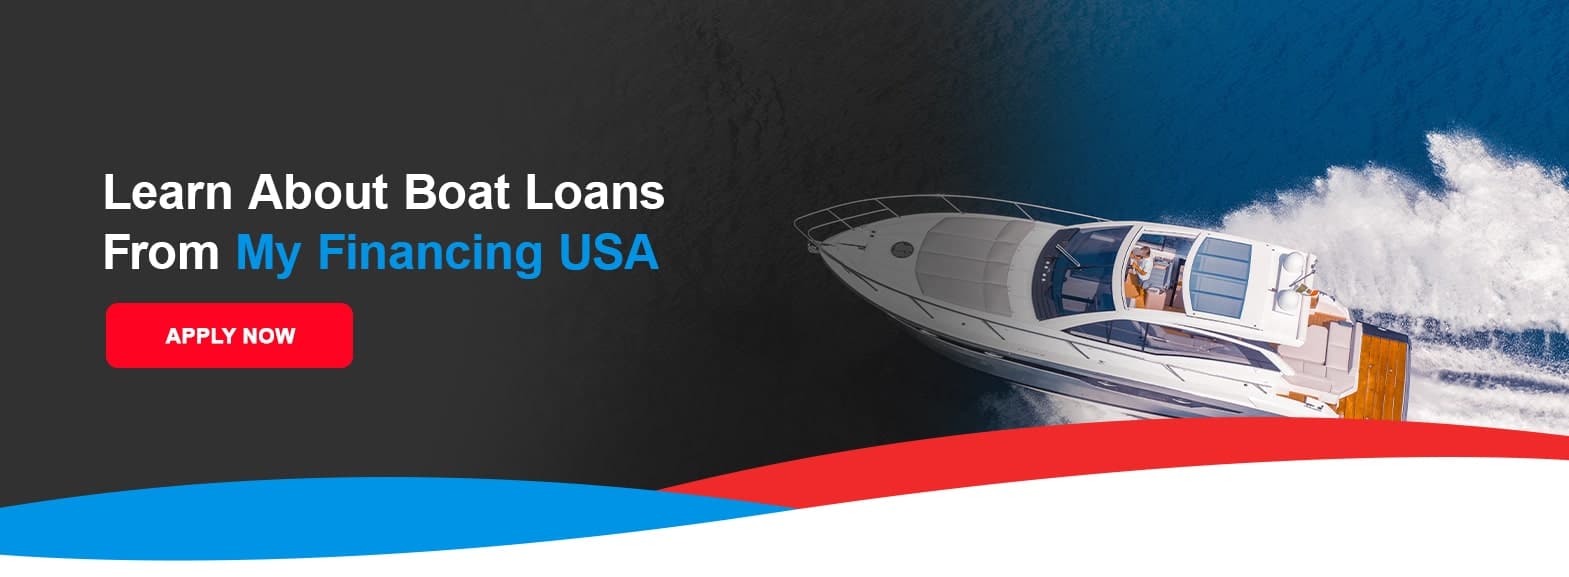 Learn About Boat Loans From My Financing USA. Apply now!